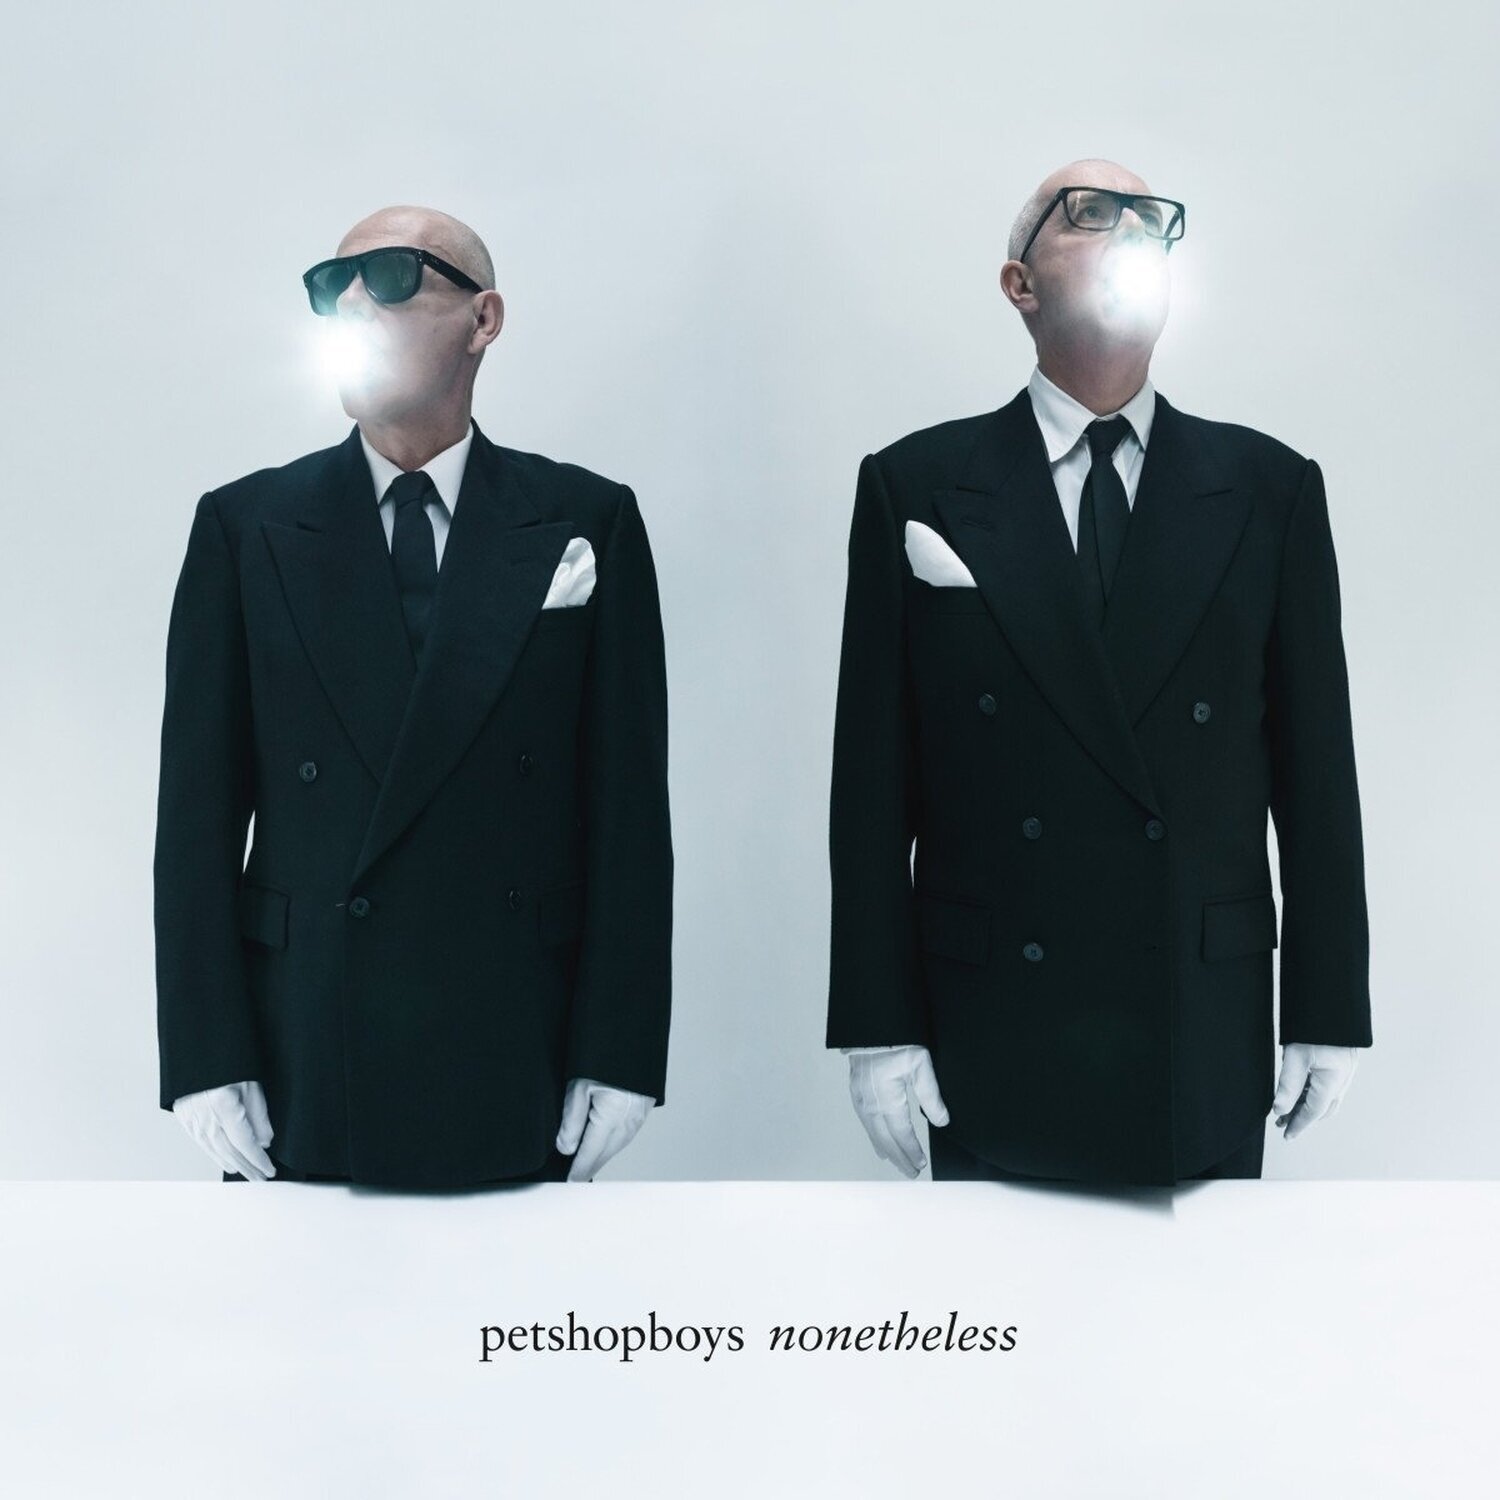 CD musique Pet Shop Boys - Nonetheless (Limited 2CD Wallet) (2 CD)